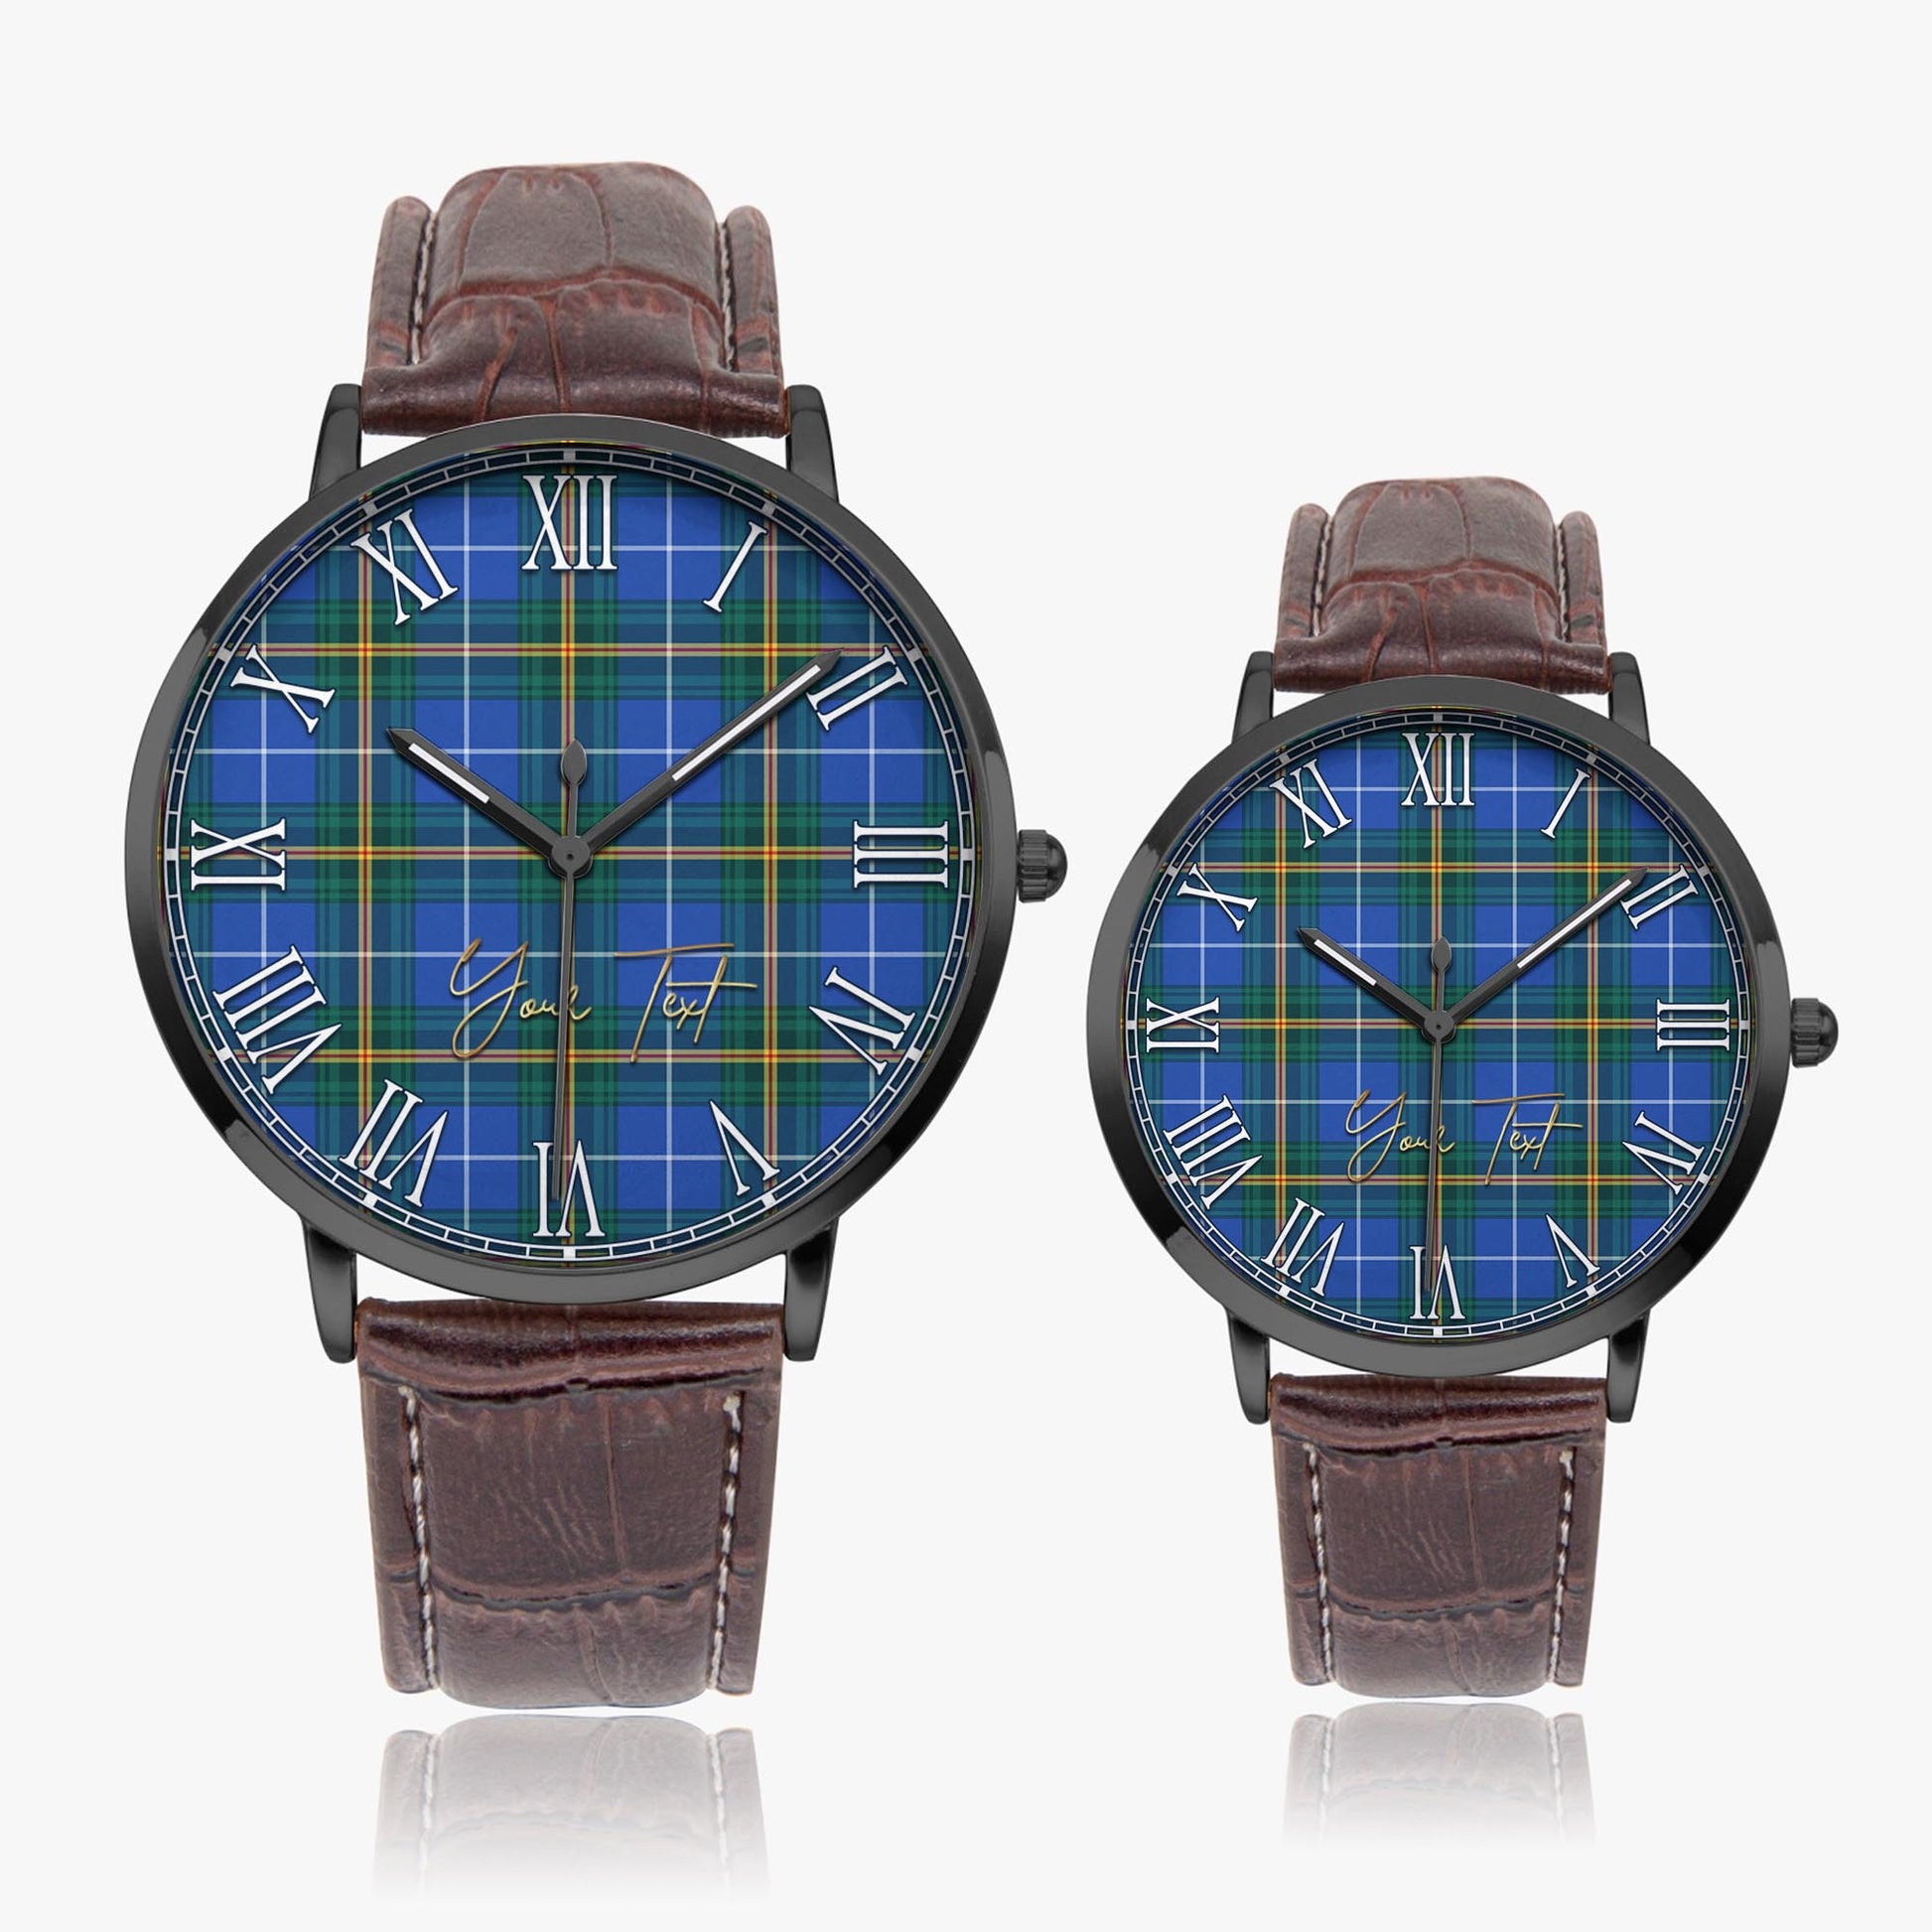 Nova Scotia Province Canada Tartan Personalized Your Text Leather Trap Quartz Watch Ultra Thin Black Case With Brown Leather Strap - Tartanvibesclothing